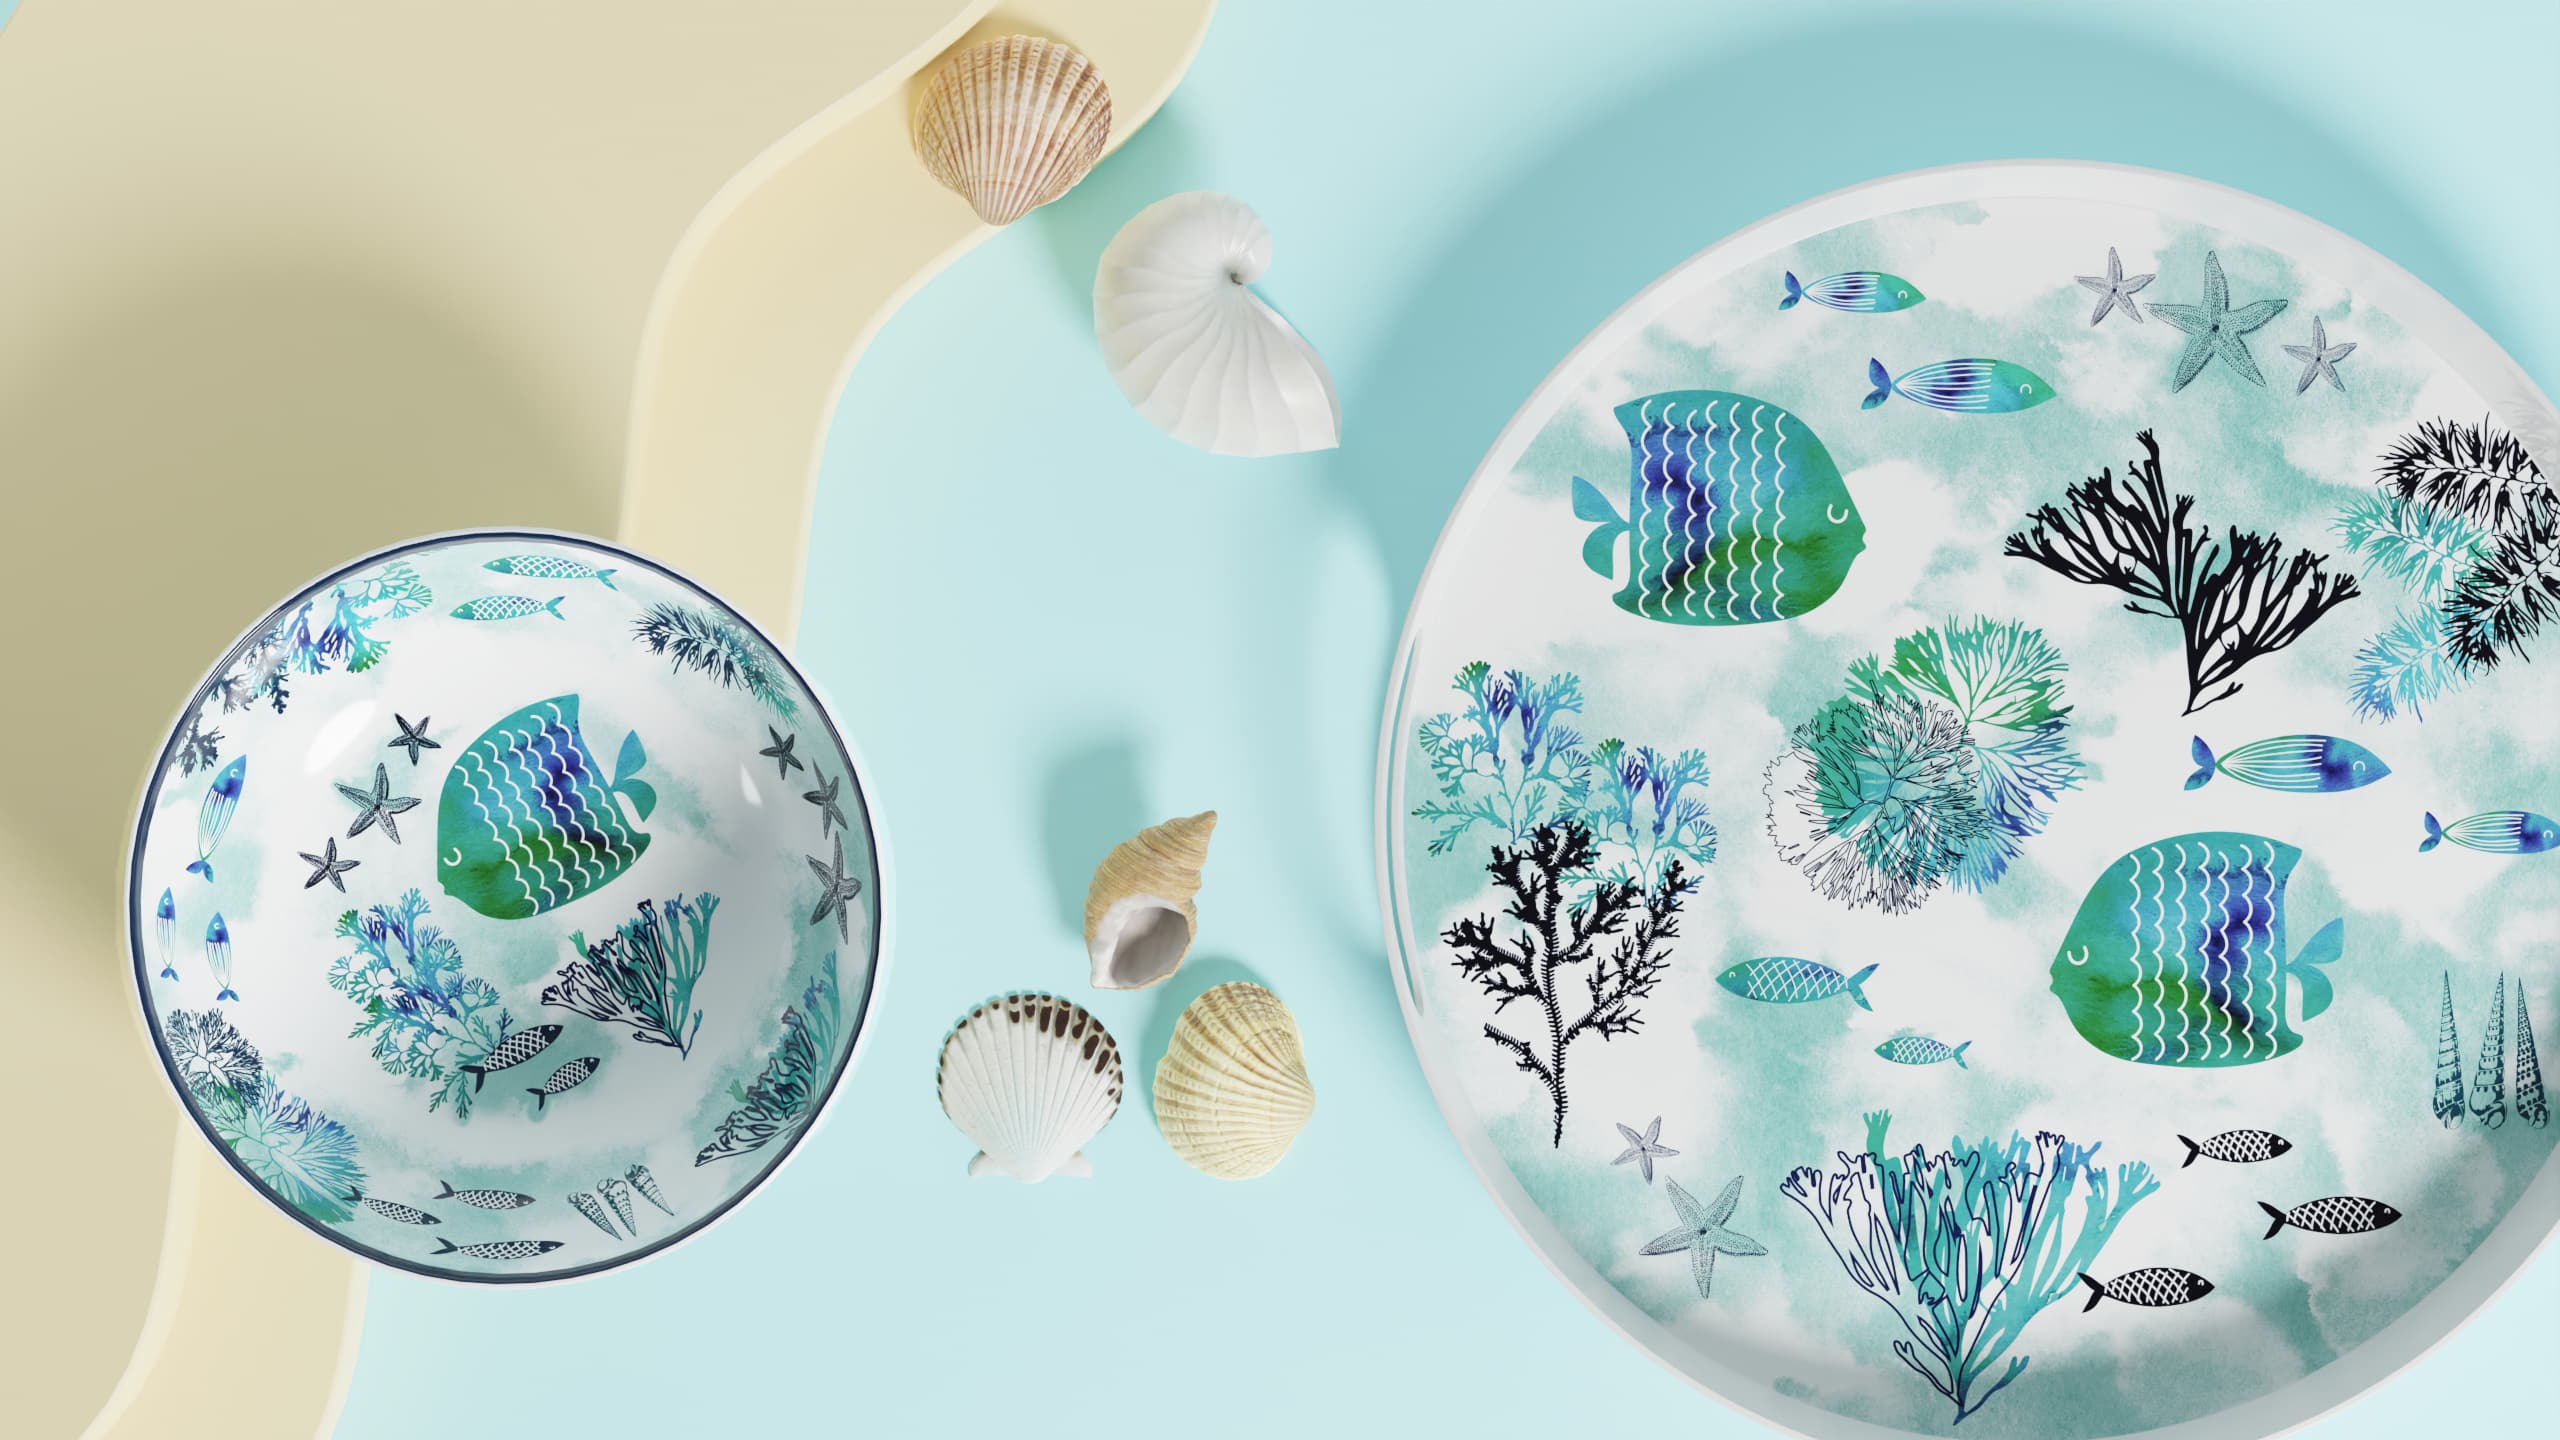 Caribbean collection in melamine